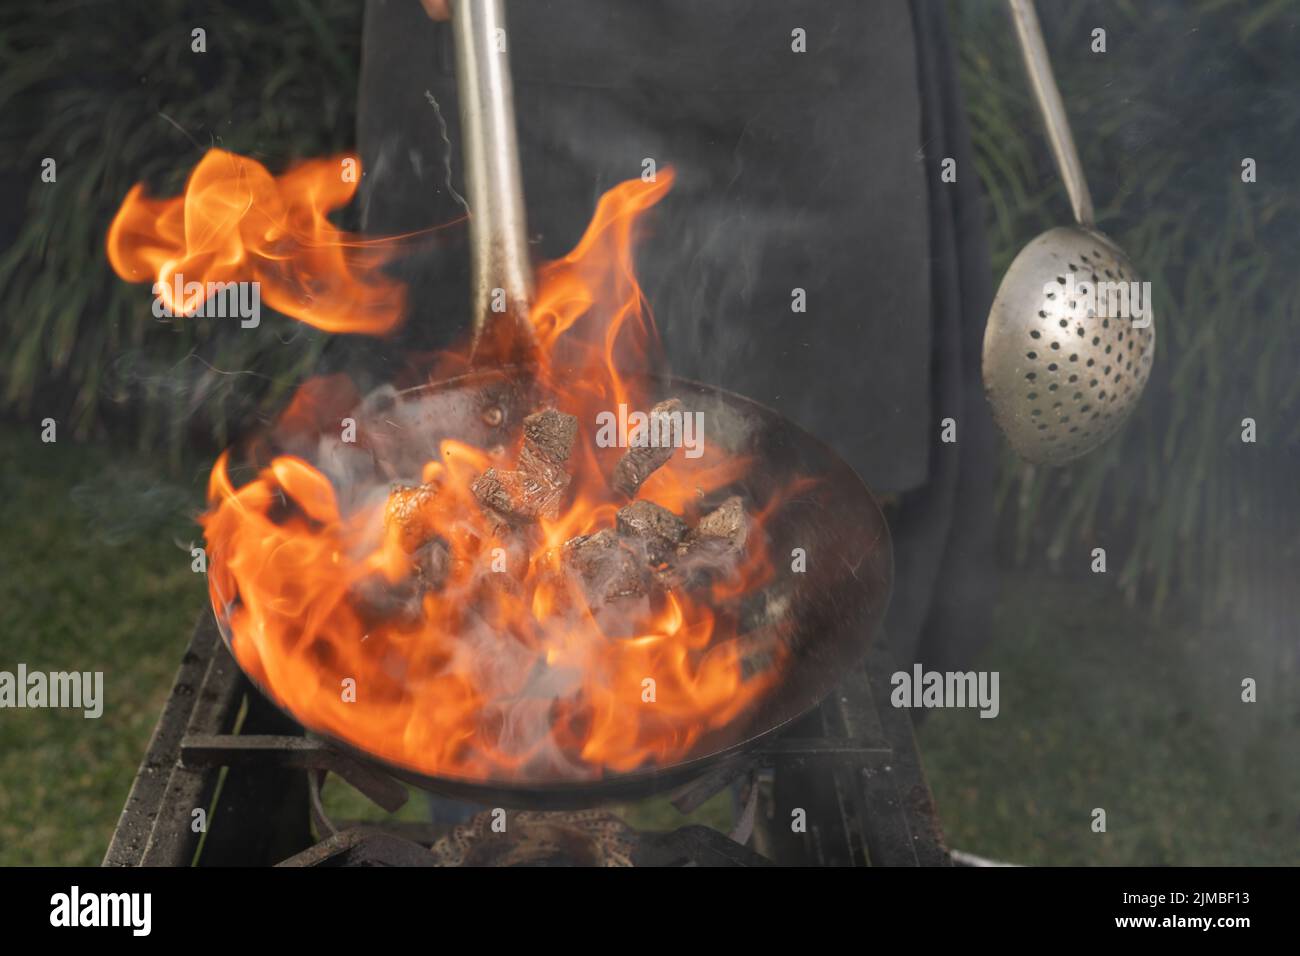 Unrecognizable person flaming meat in a garden using a portable stove and a pan Stock Photo